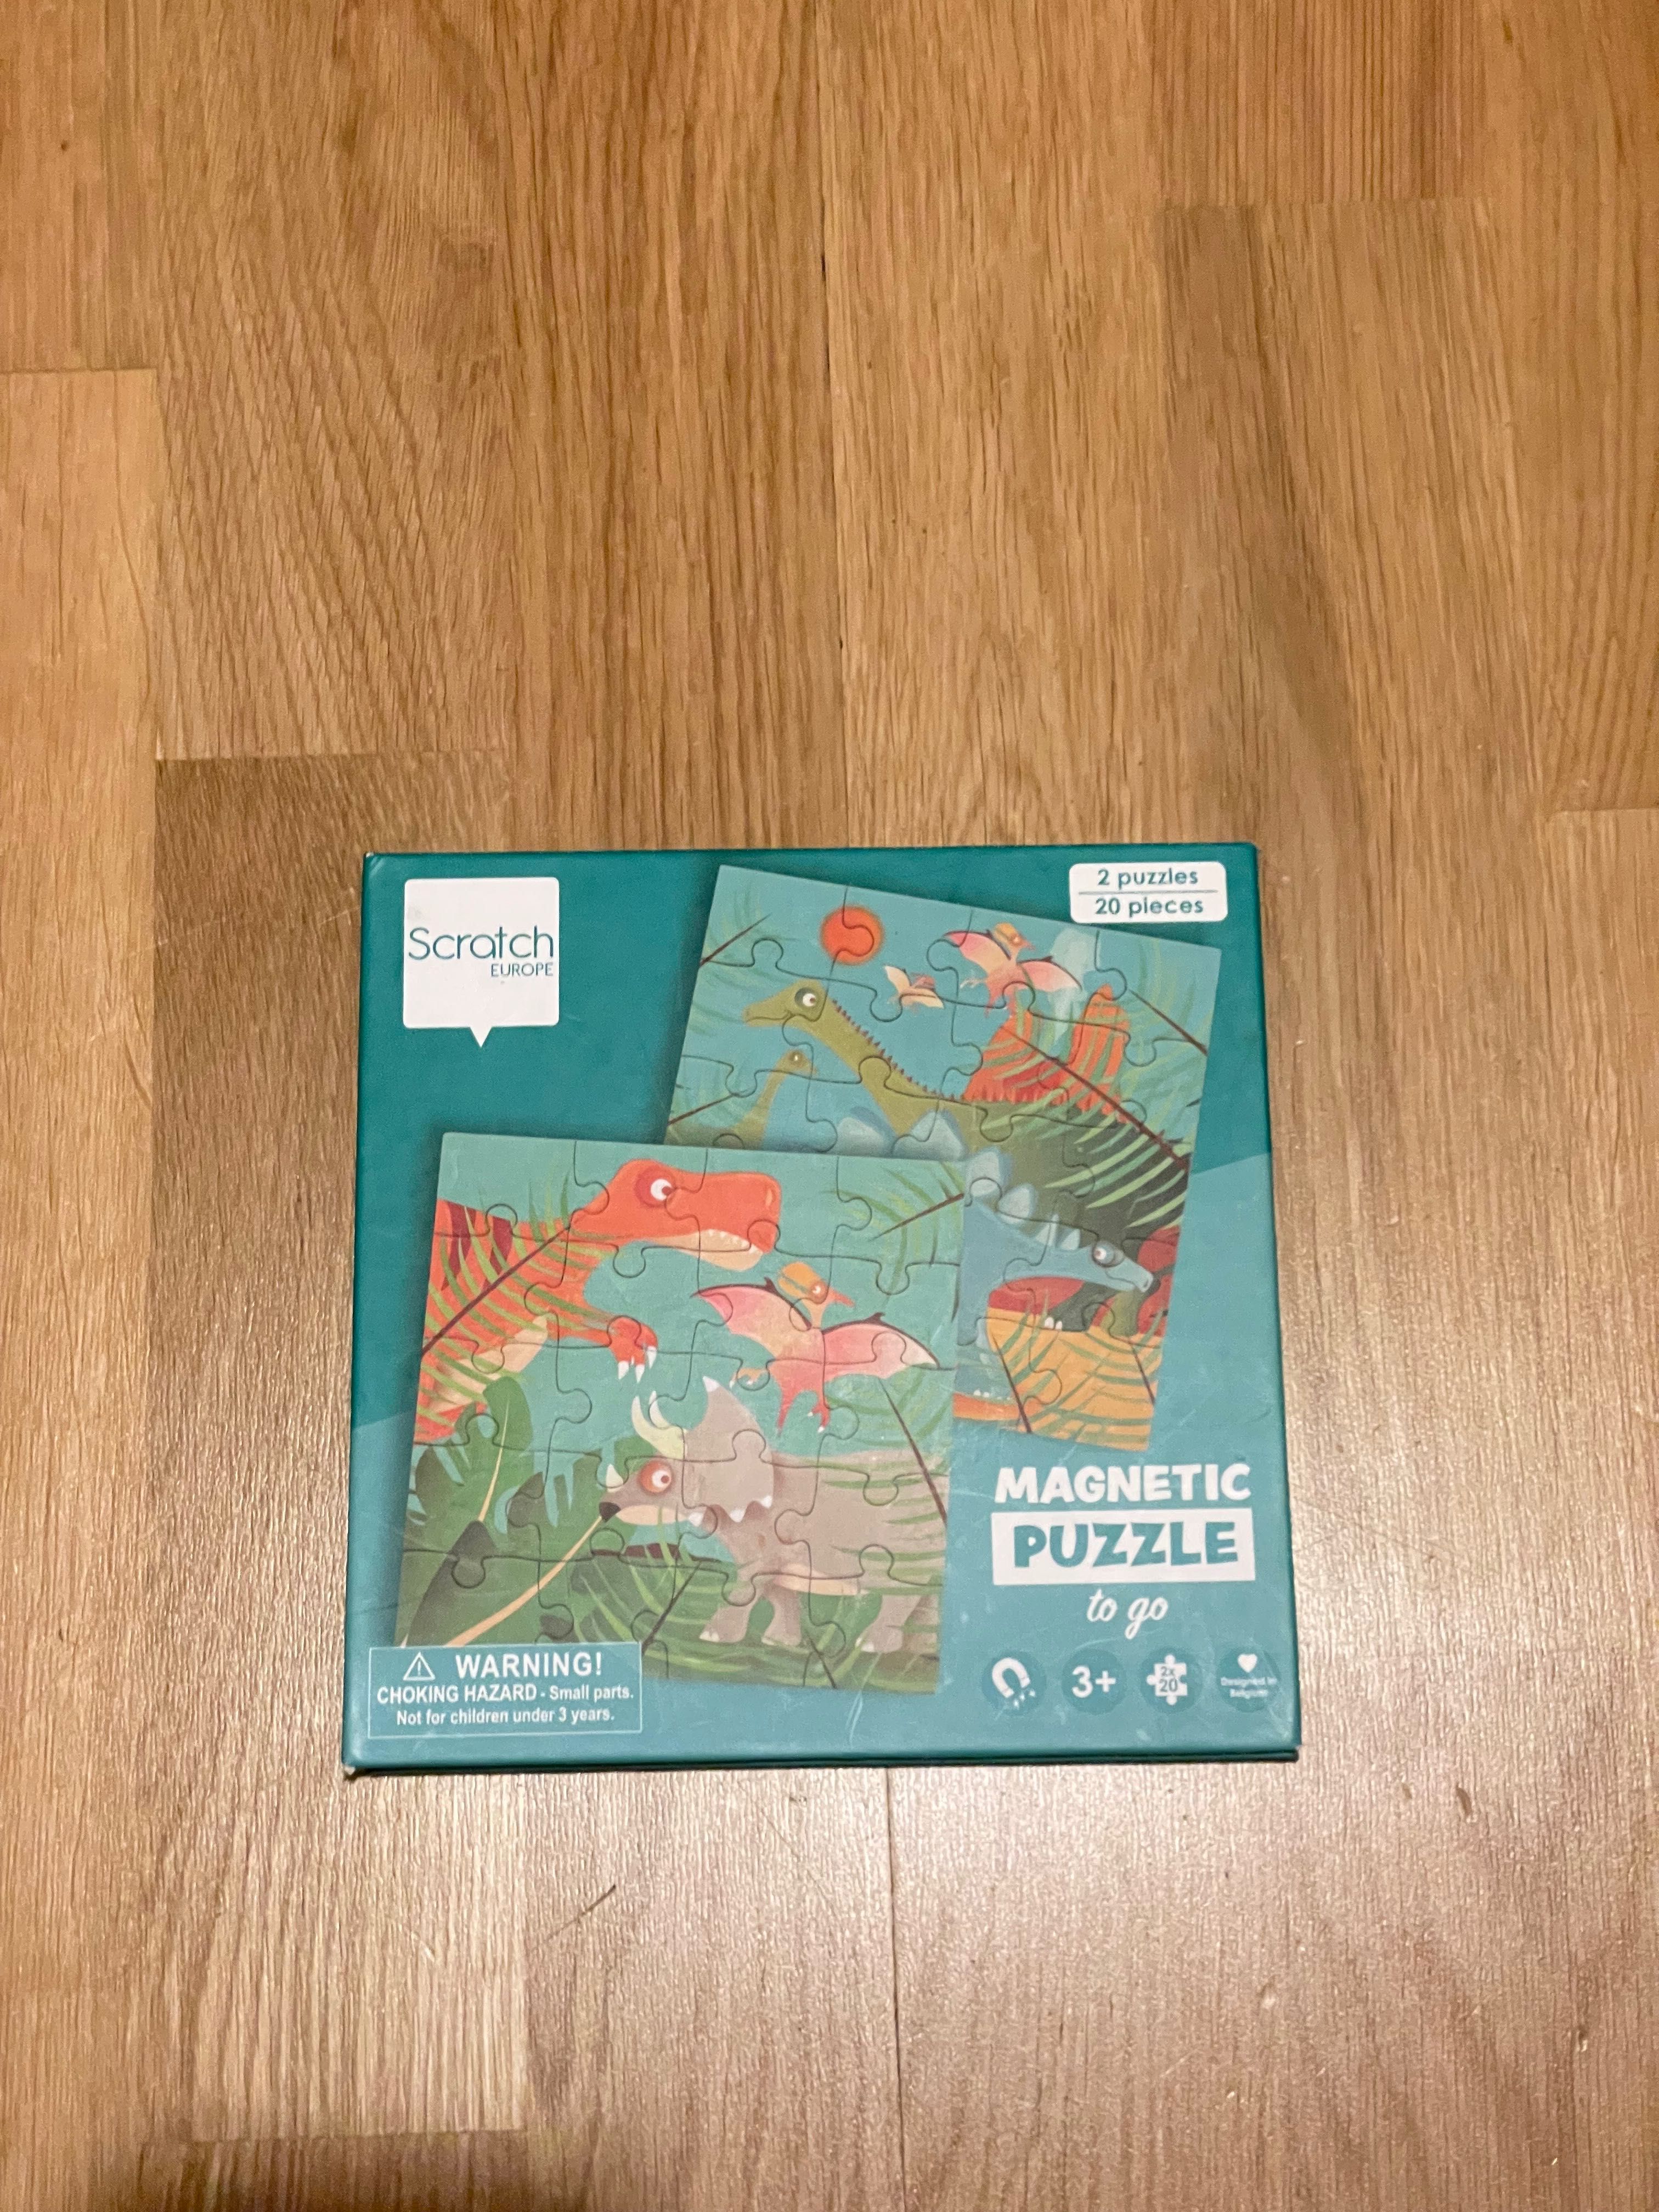 Scratch Europe magnetic puzzle - dinozaury